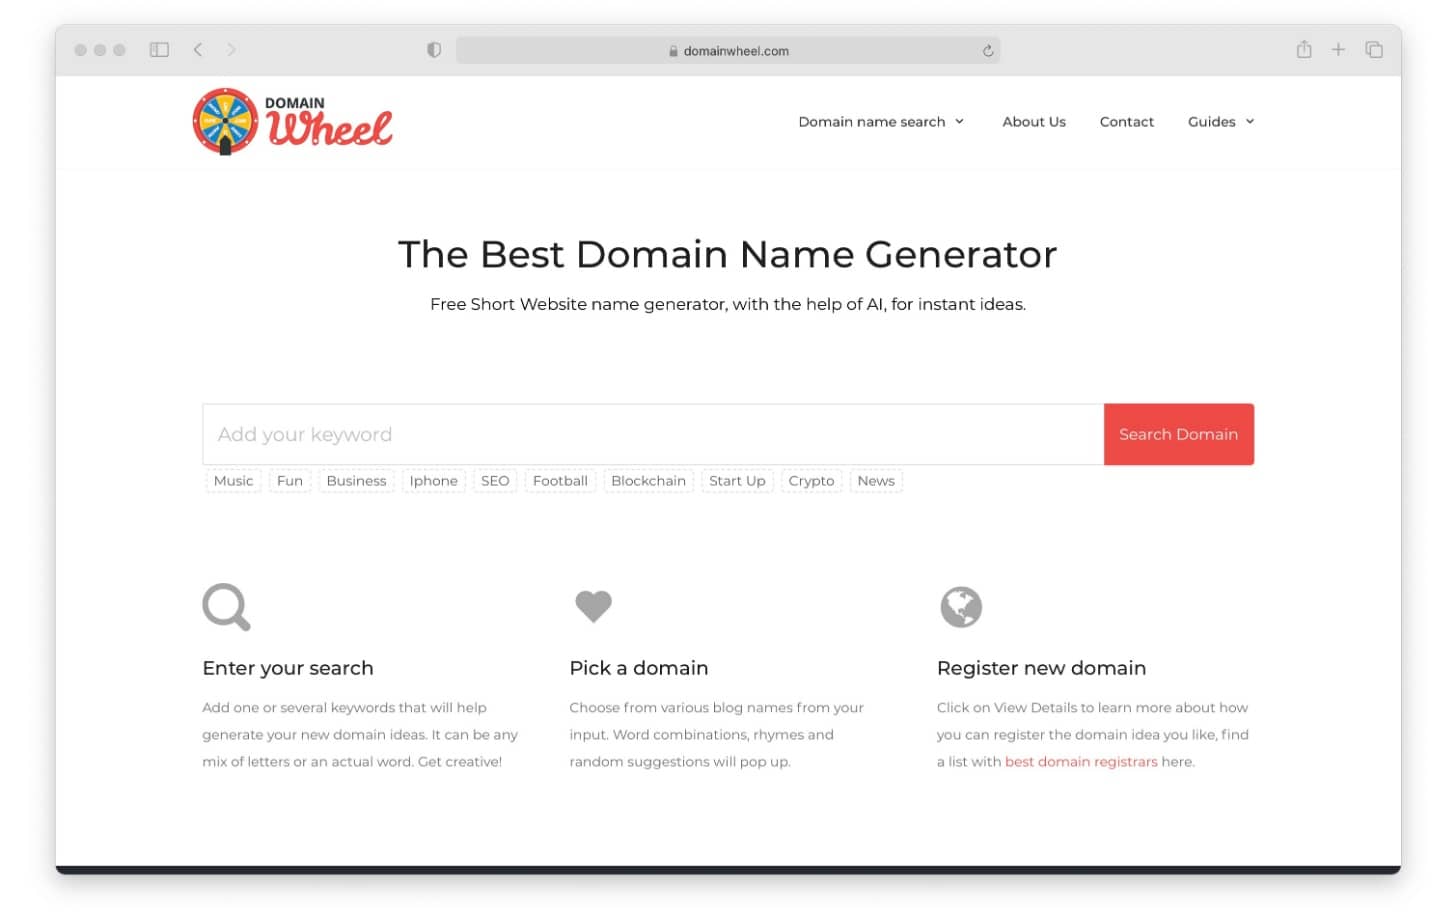 Domain Wheel helps you find domain names based on keywords